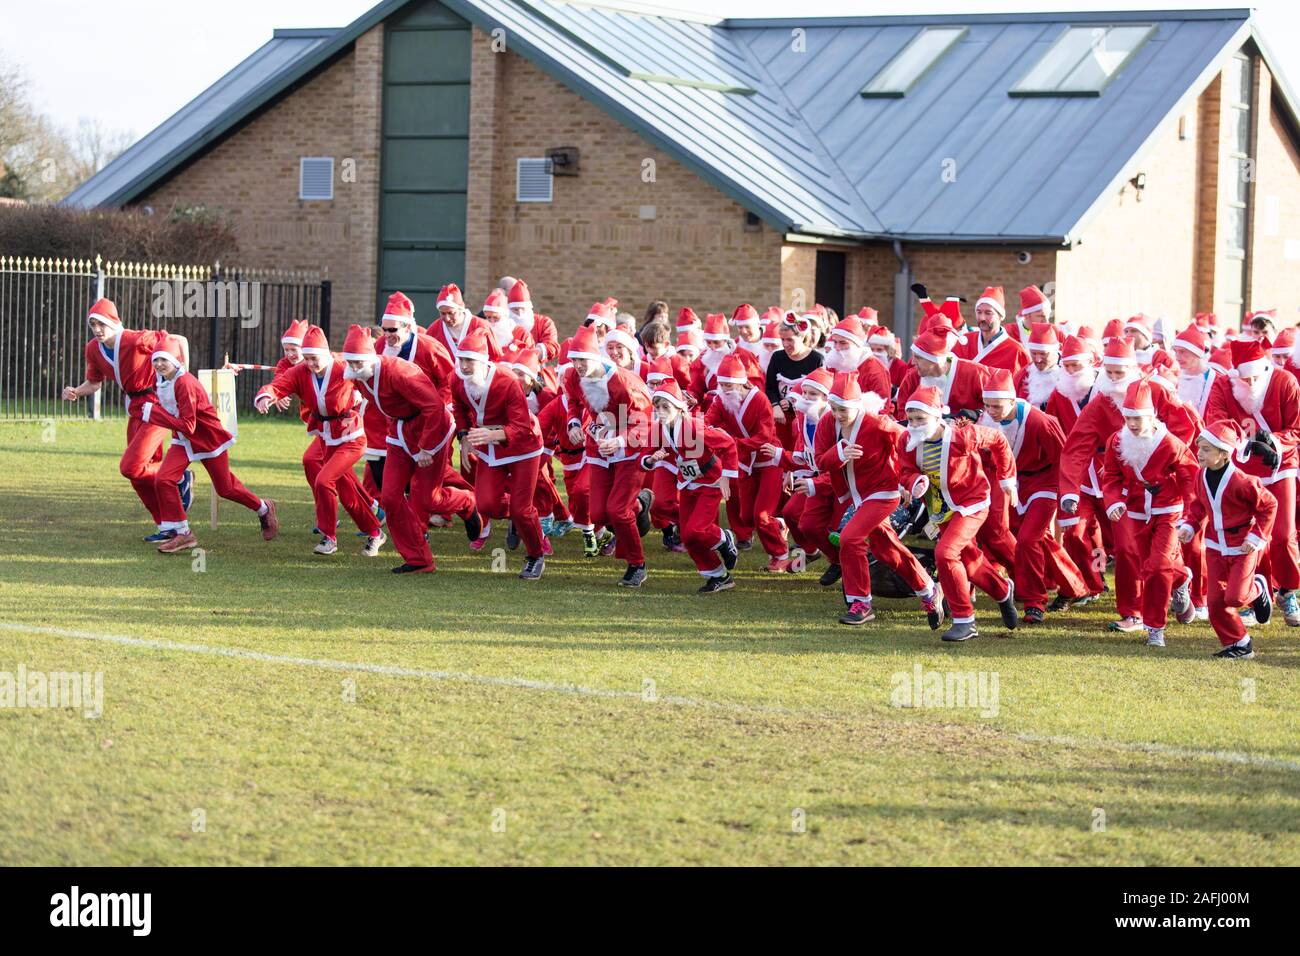 Oxfordshire, UK - December 14th 2019: People dressed as Father Christmas take part in the annual santa fun run. Stock Photo